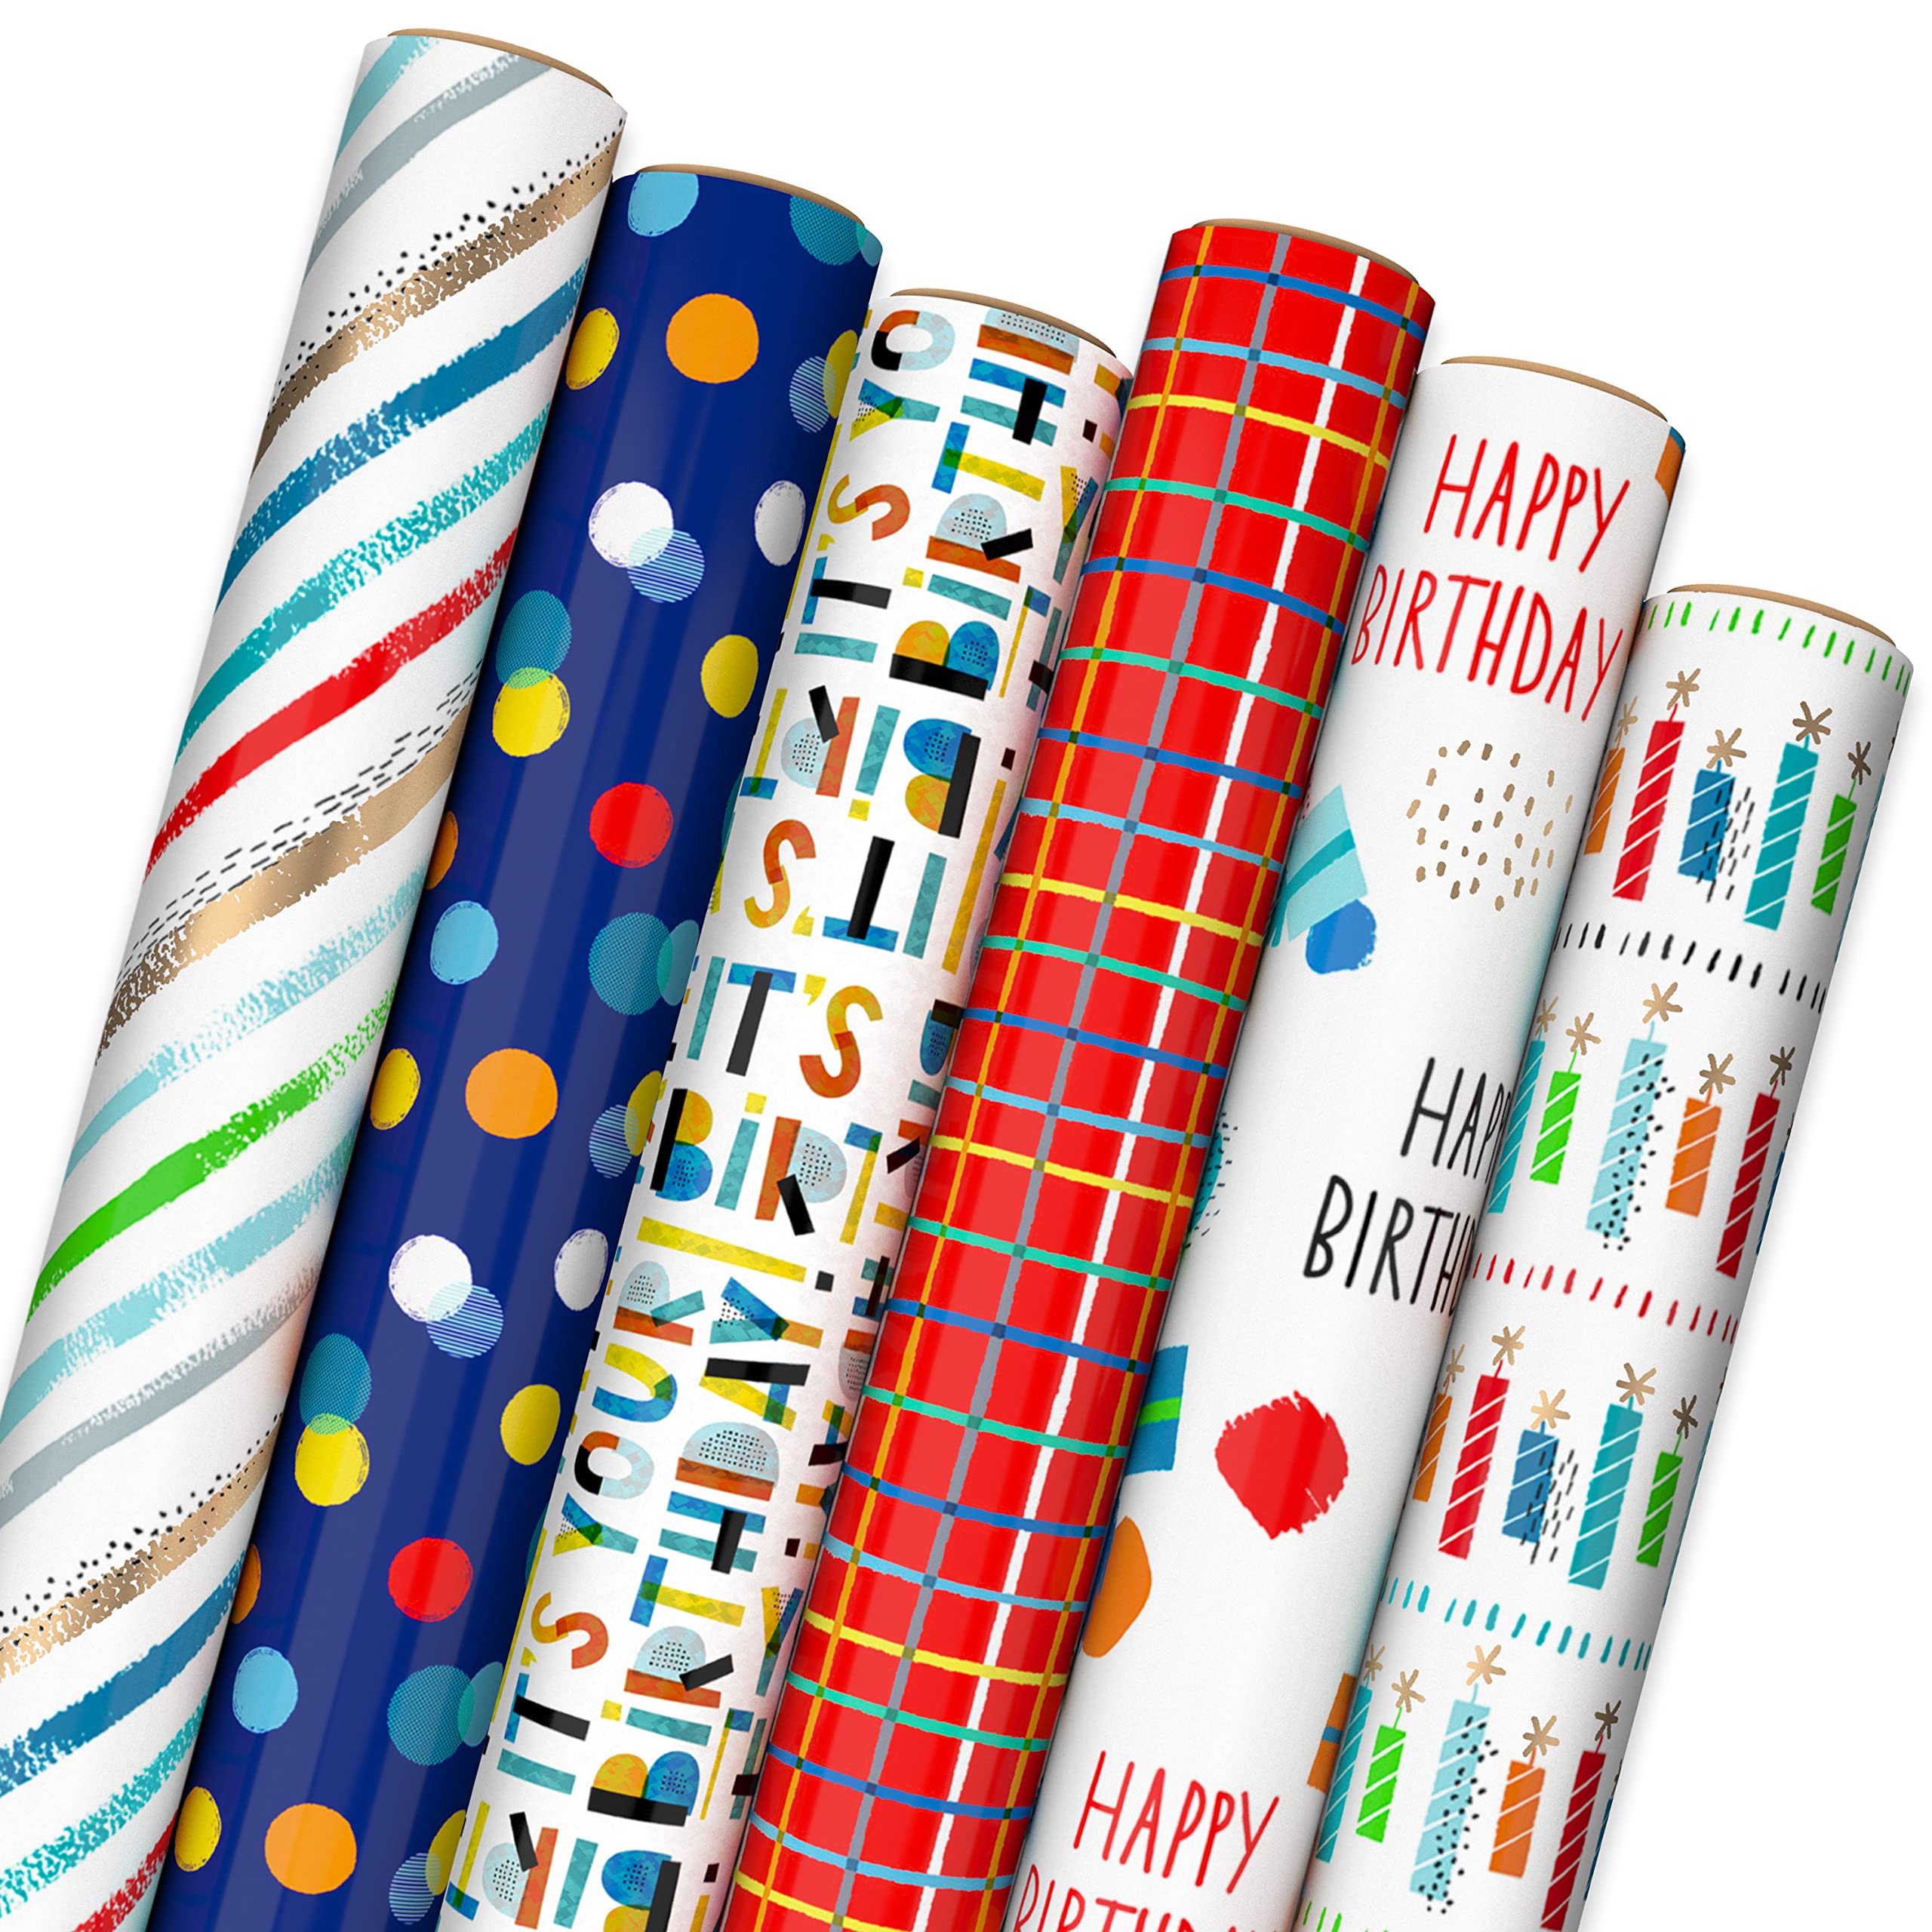 Hallmark Colorful Wrapping Paper Bundle with Cutlines on Reverse (6 Rolls: 115 Square Feet Total) Red, Blue, Yellow, Green, Rainbow Stripes, Polka Dots for Birthdays, Graduations, Father's Day